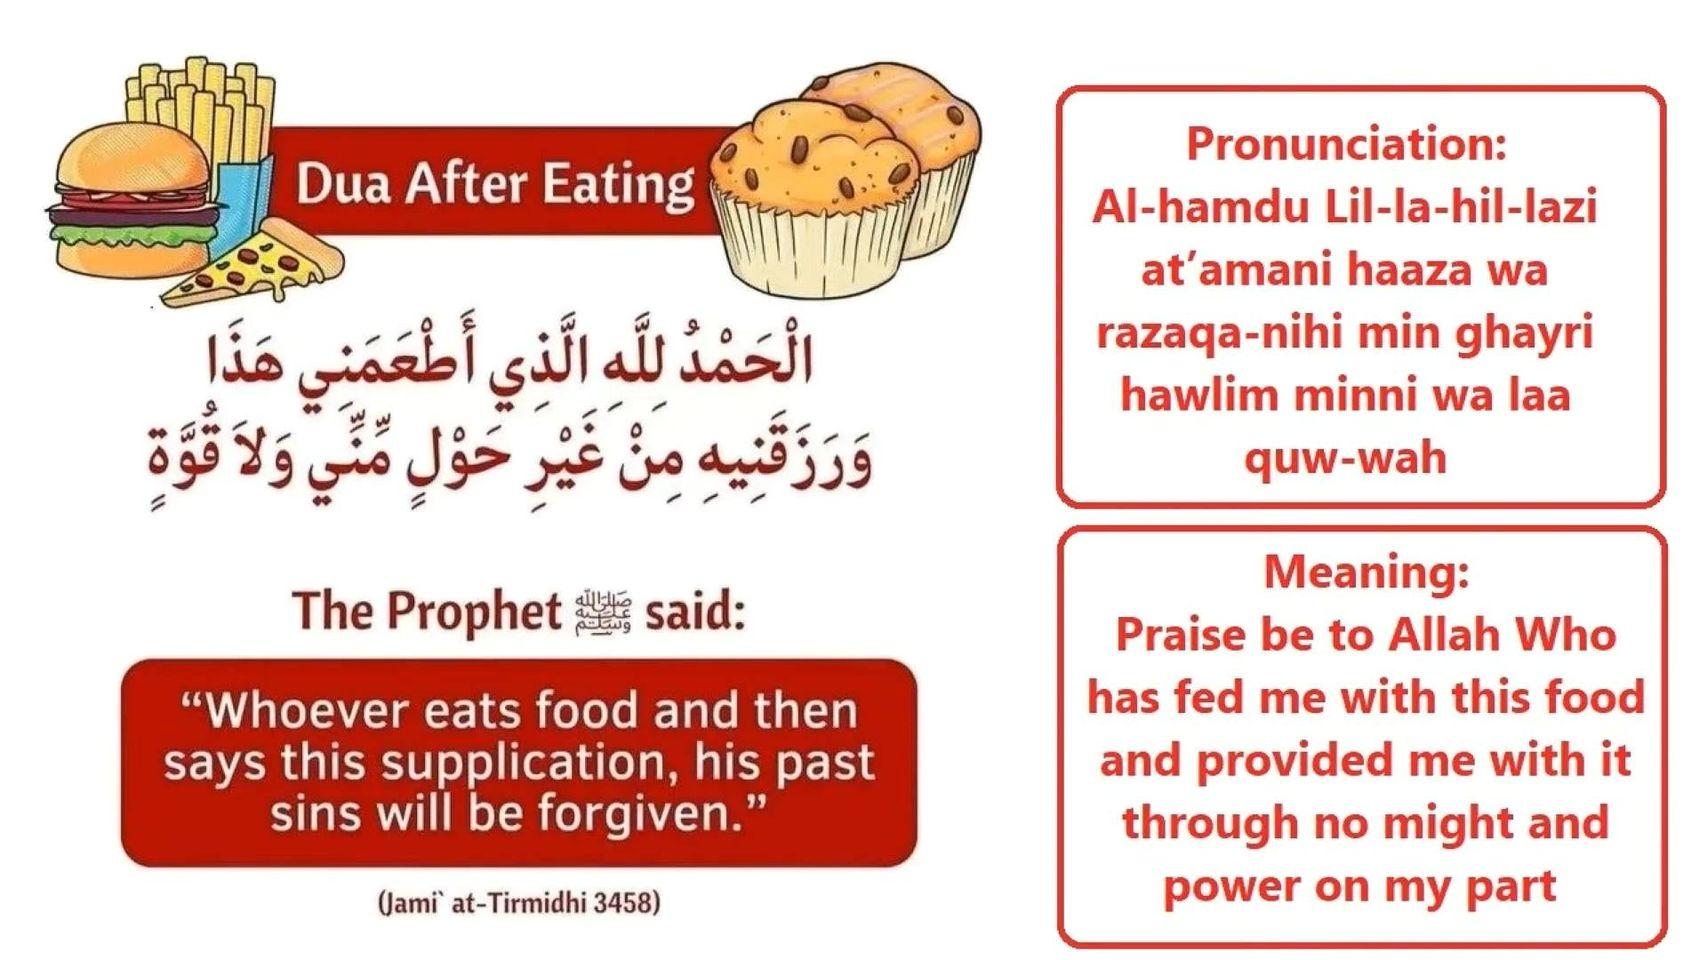 337021285 166400359608820 82095572939429 1 - Dua After Just Finishing Your Food - All Past Sins Forgiven